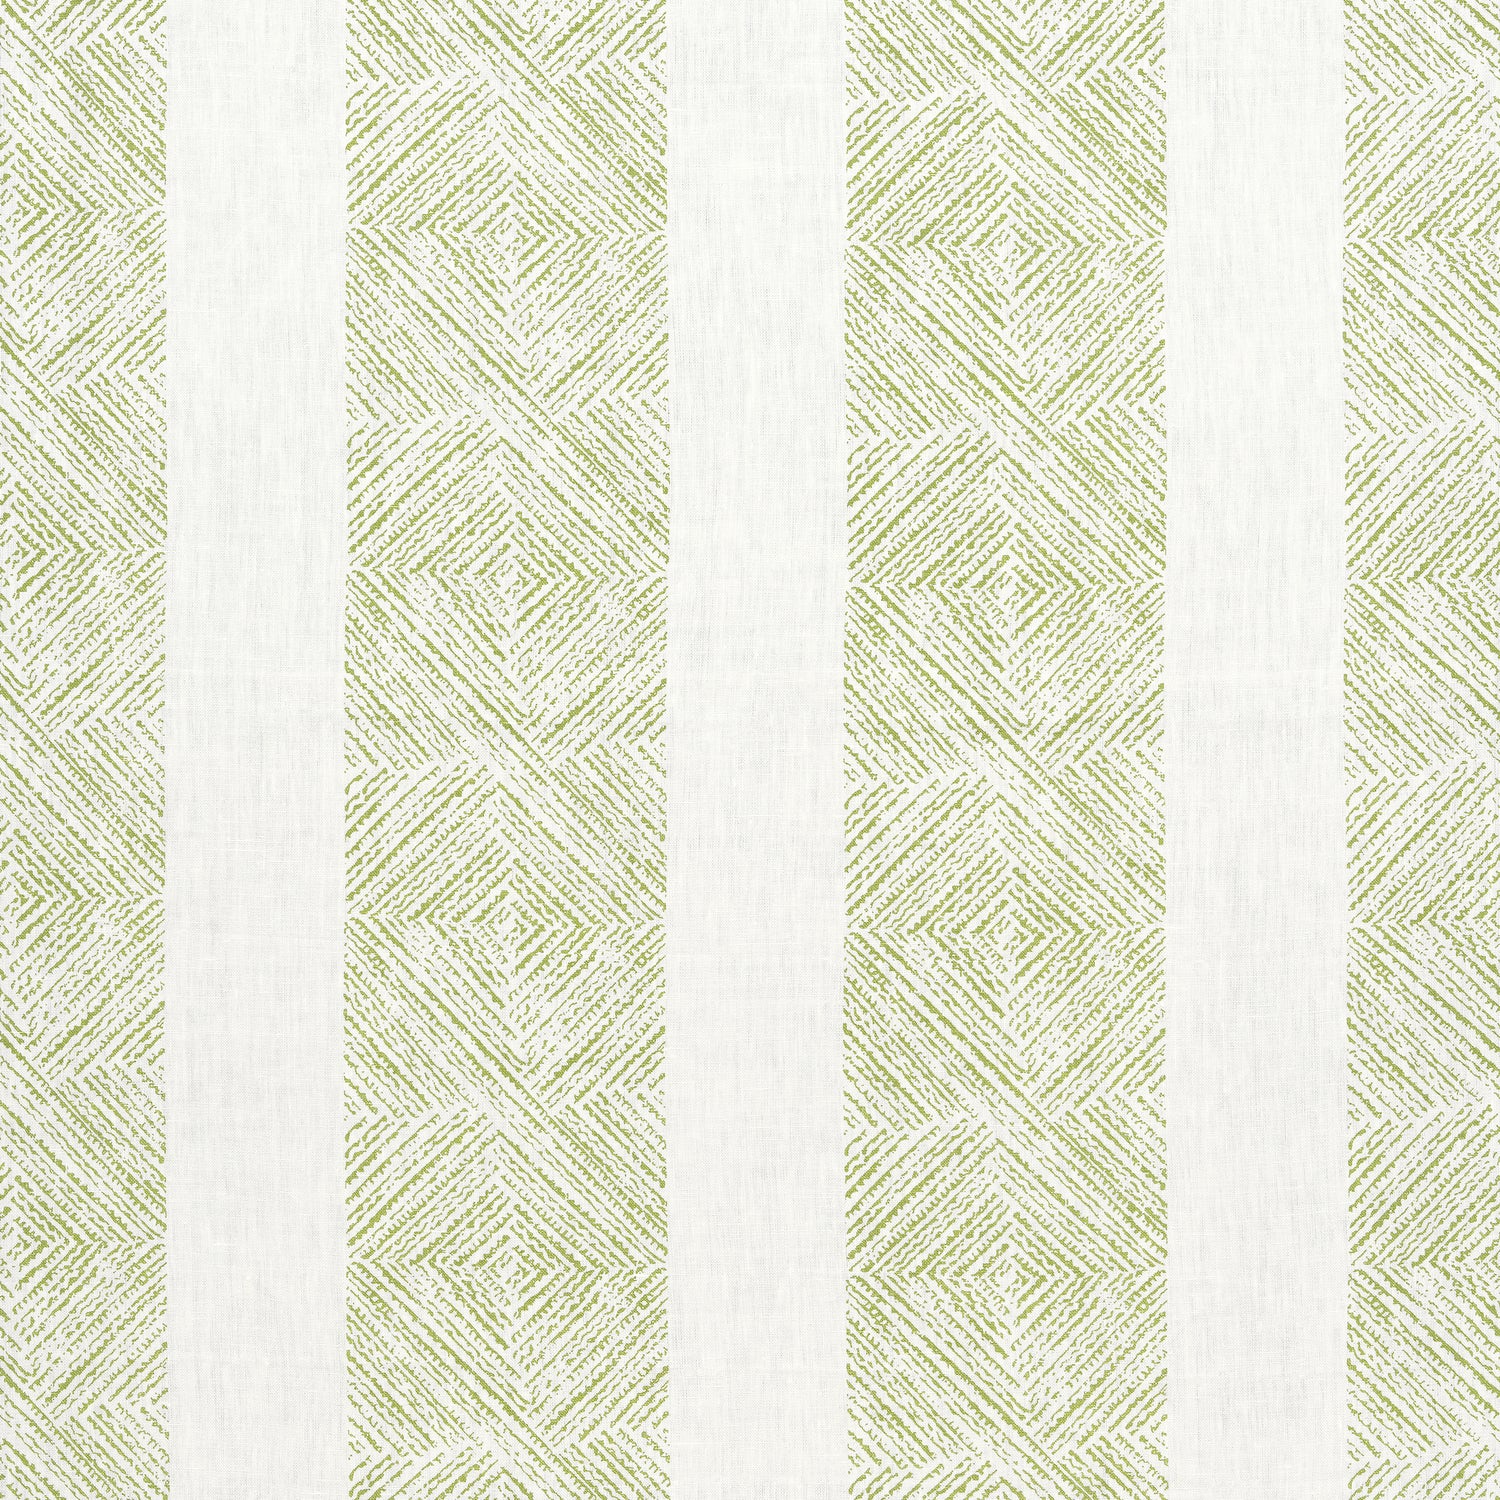 Clipperton Stripe fabric in green color - pattern number AF15125 - by Anna French in the Antilles collection